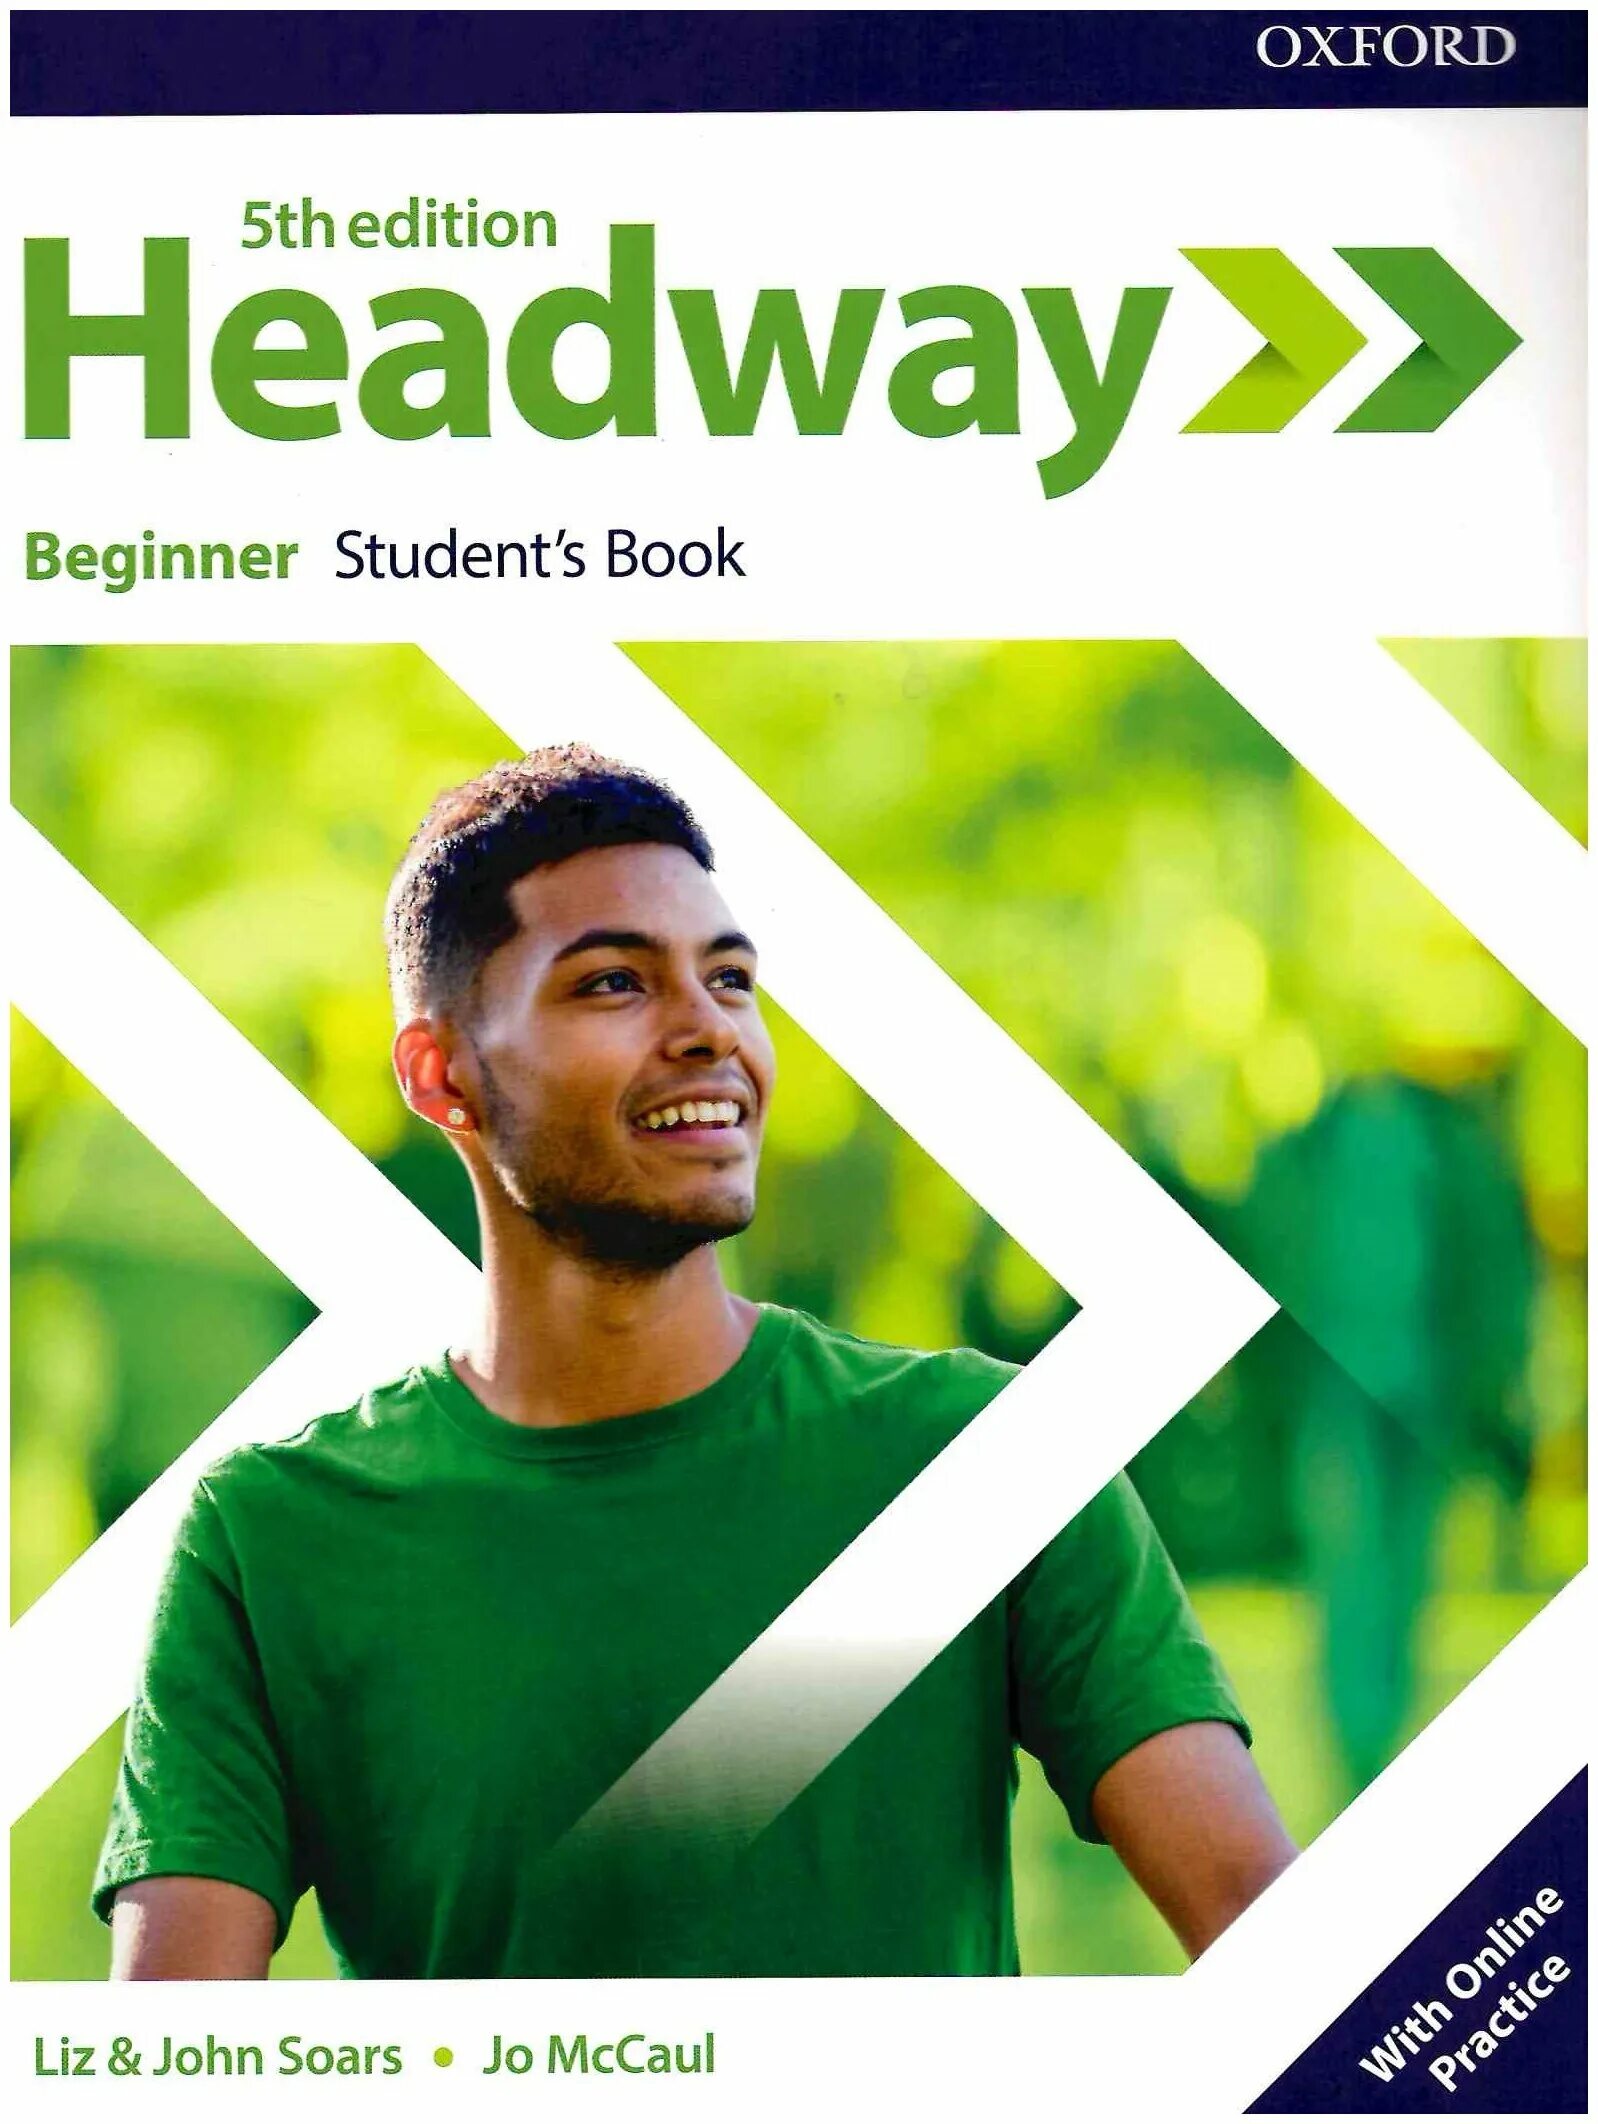 Student s book new edition. Headway Beginner 5th Edition book Cover. New Headway Beginner student's book 5th Edition. New Headway Beginner 5 th students book. New Headway Beginner 5th Edition.